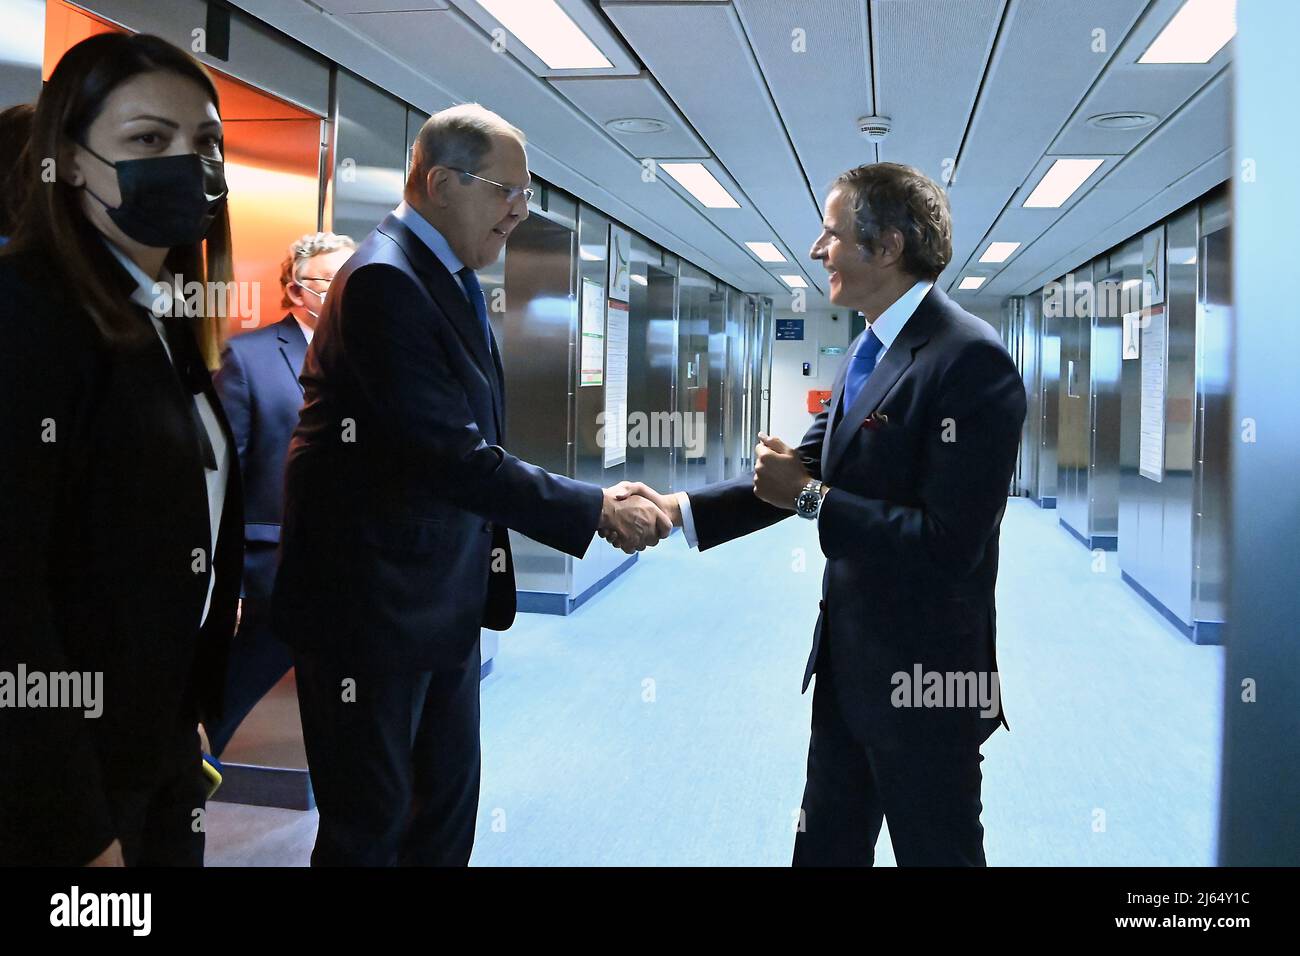 Rafael Mariano Grossi, IAEA Director General, welcomes HE Mr. Sergey V. Lavrov, Minister of Foreign Affairs of the Russian Federation and his delegation upon their arrival at the Agency headquarters in Vienna, Austria. 26 August 2021. Stock Photo